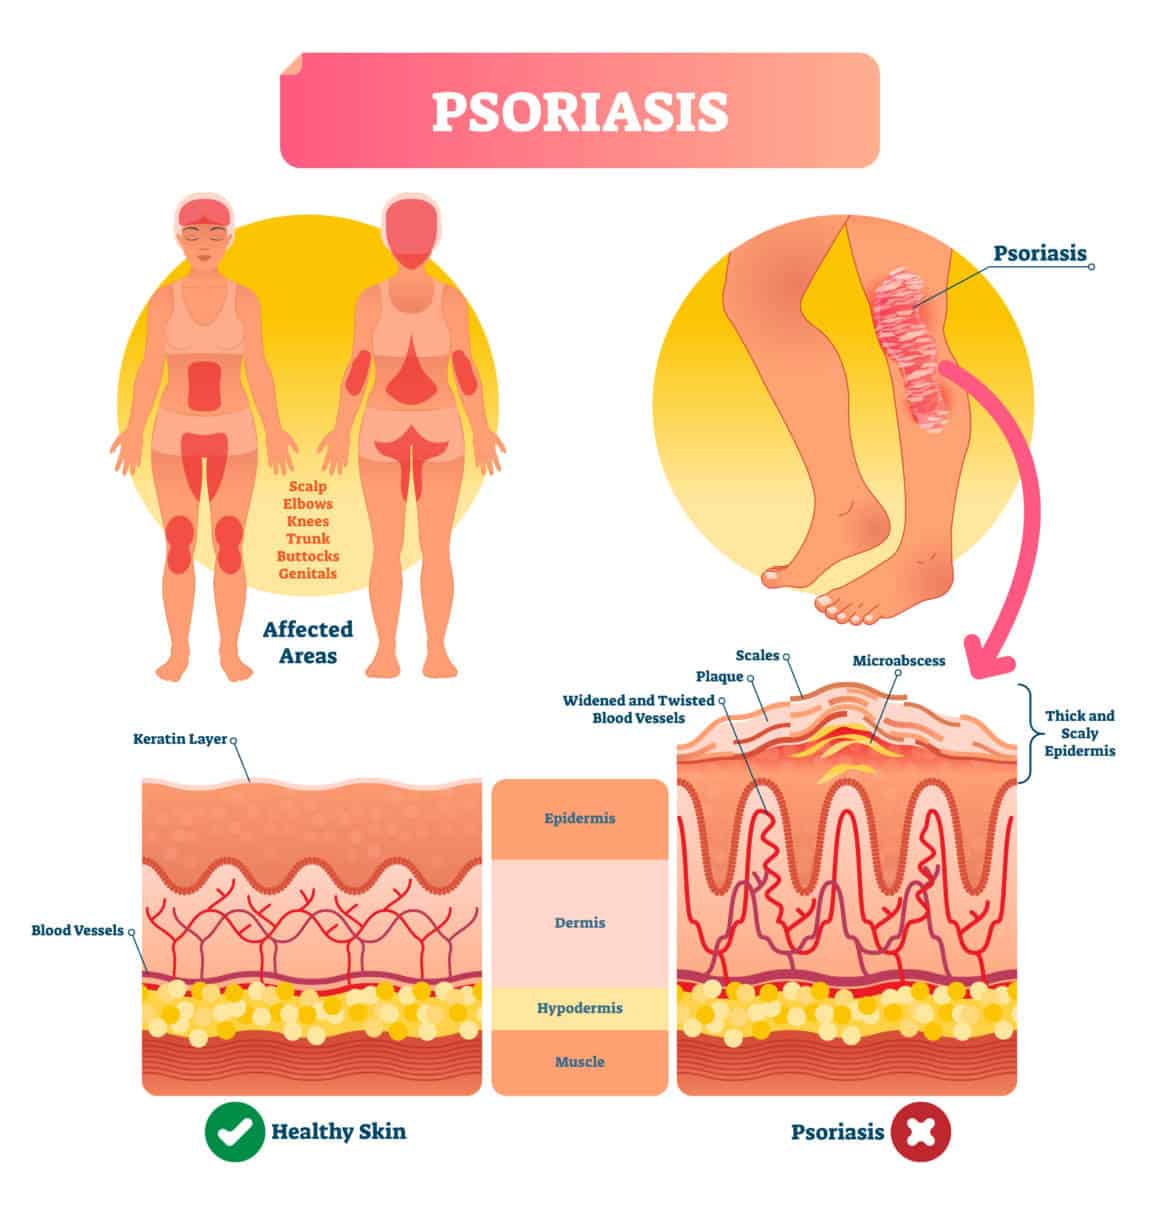 Psoriasis vector illustration. Autoimmune skin disease and illness. Labeled structure with scales, plaque, widened and twisted blood vessels. Shown affected areas on human body.